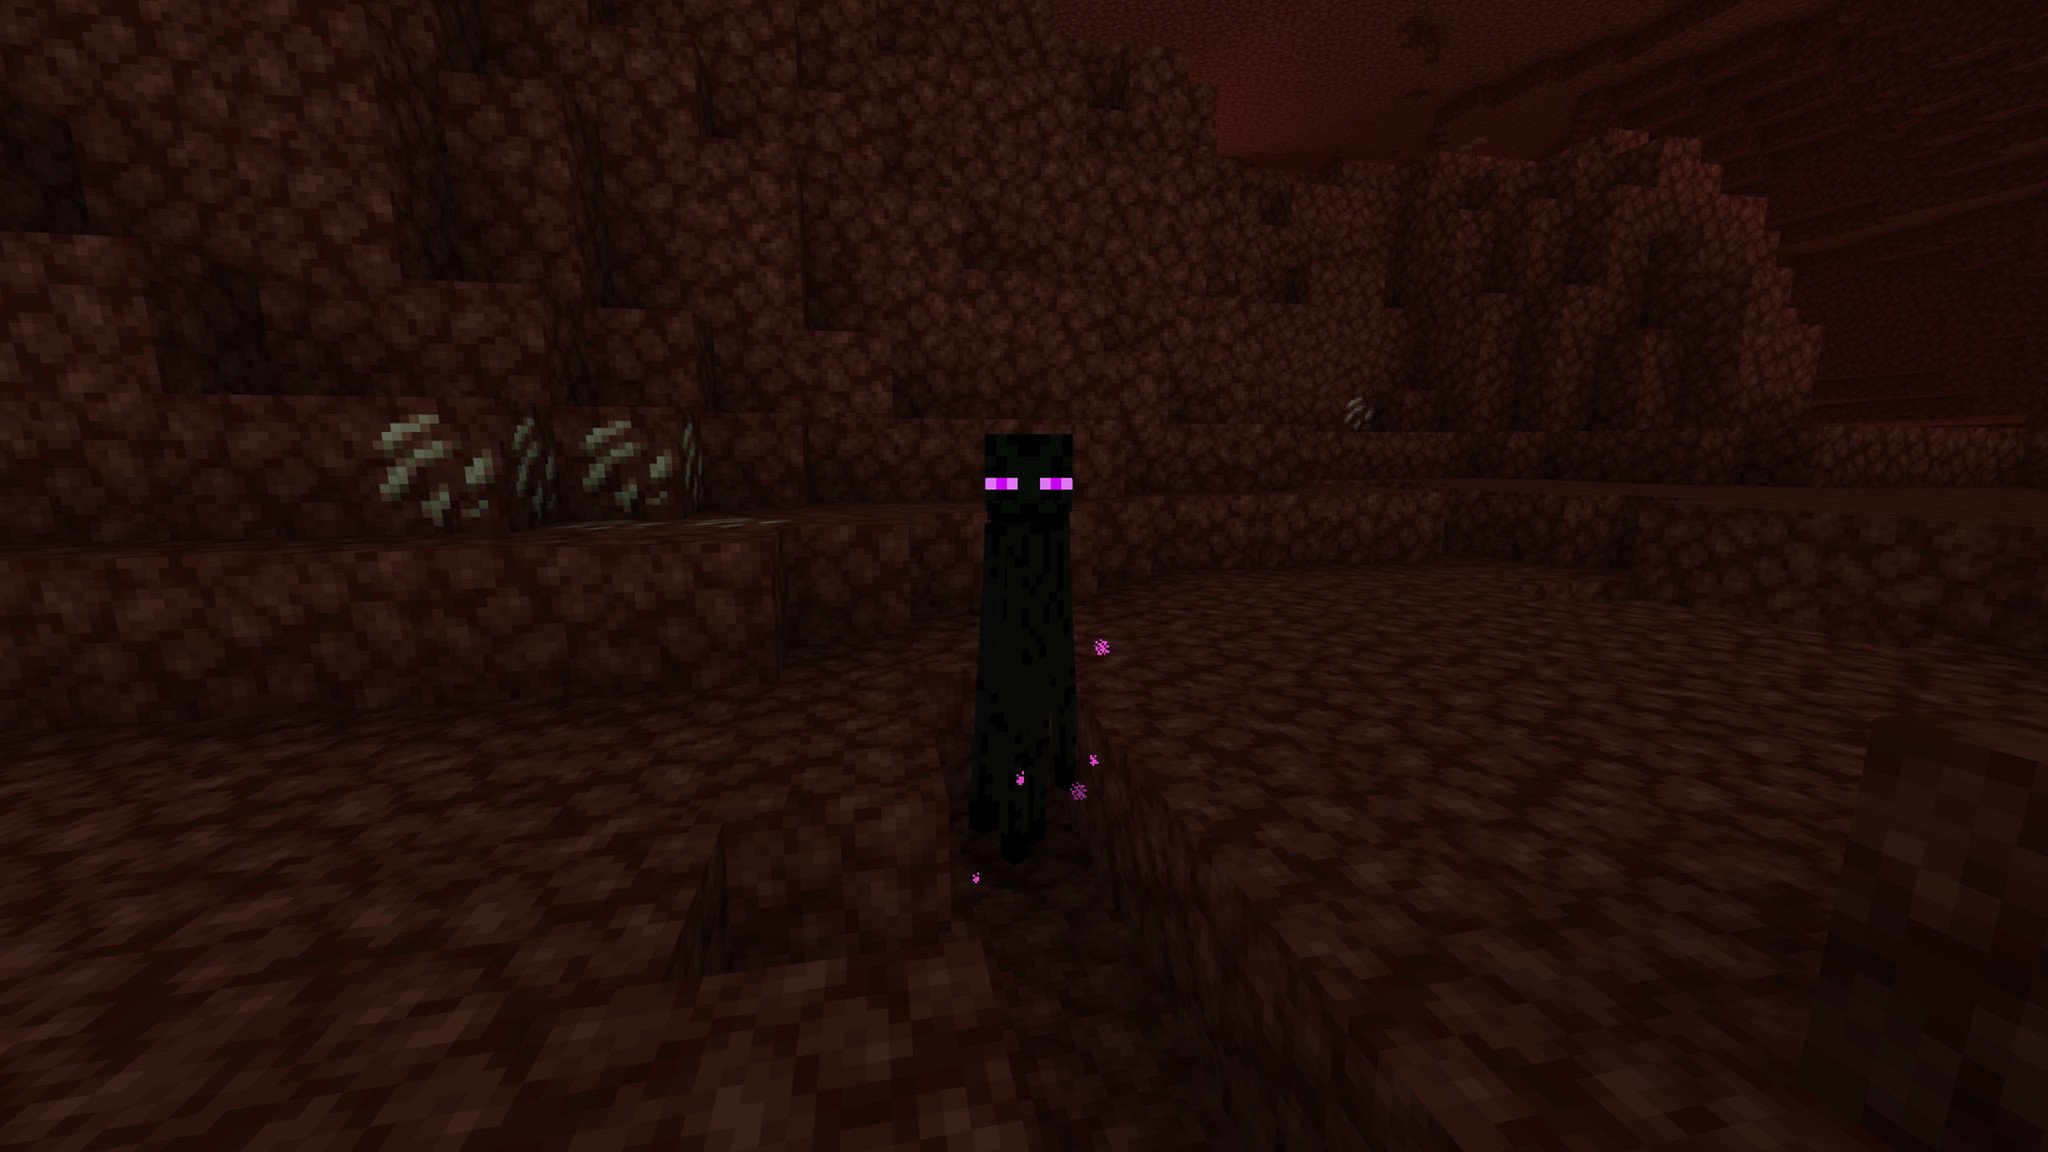 What Is The Nether In Minecraft?